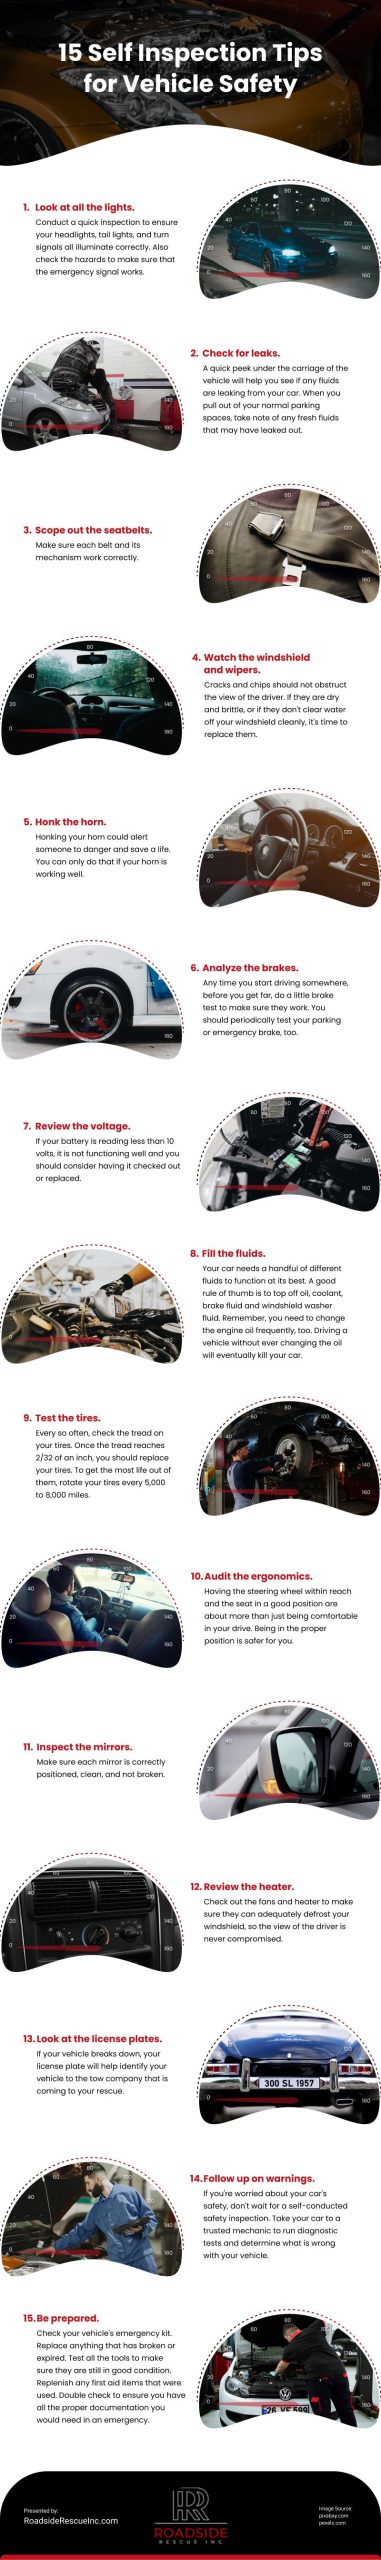 15 Self Inspection Tips for Vehicle Safety Infographic